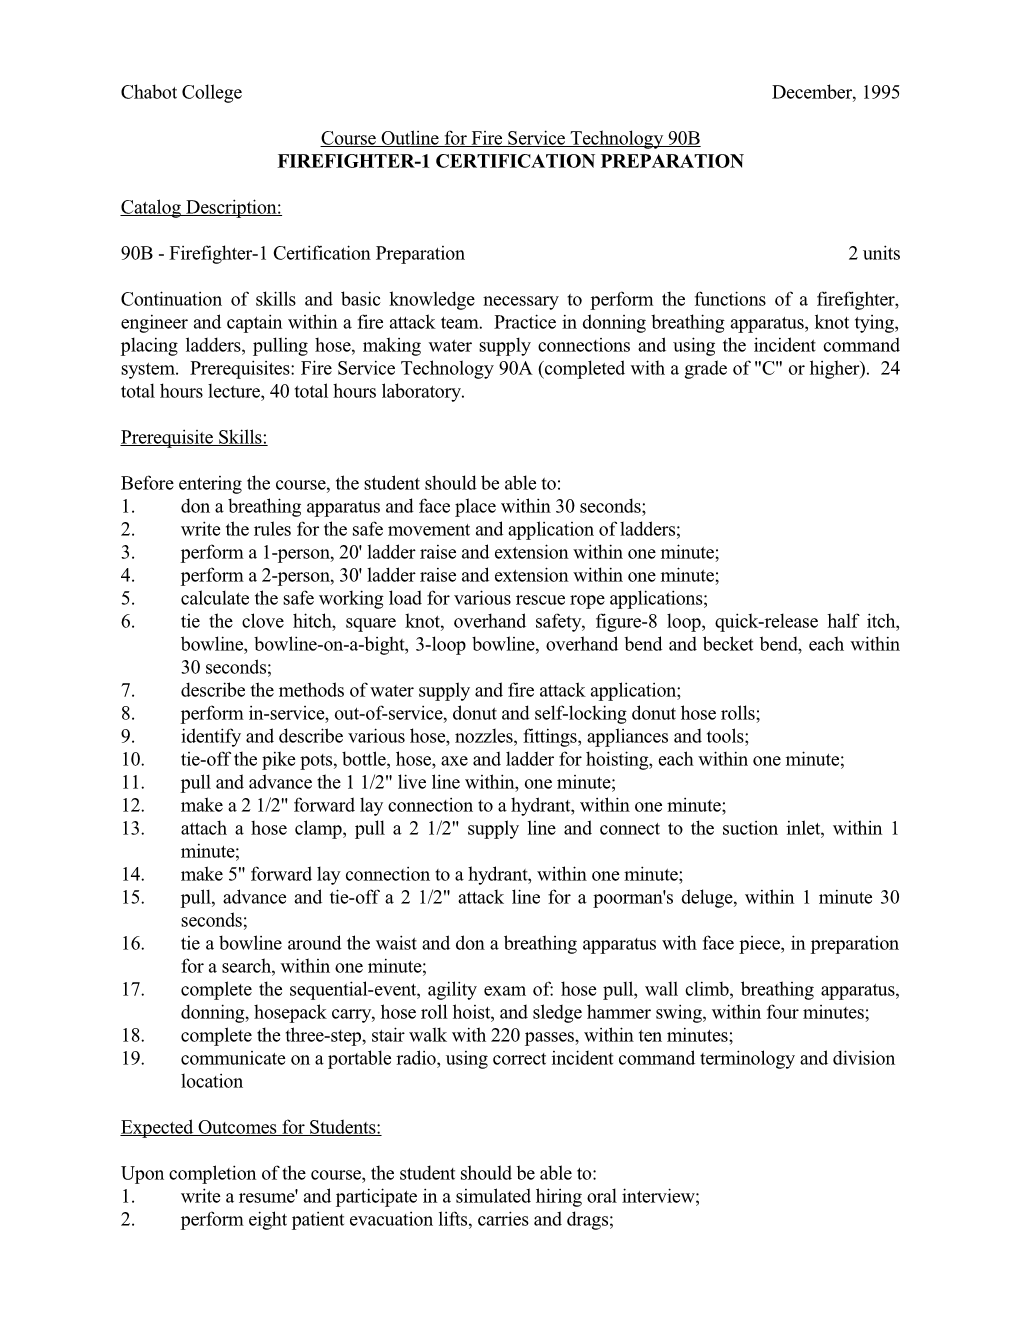 Course Outline for Fire Service Technology 90B, Page 3